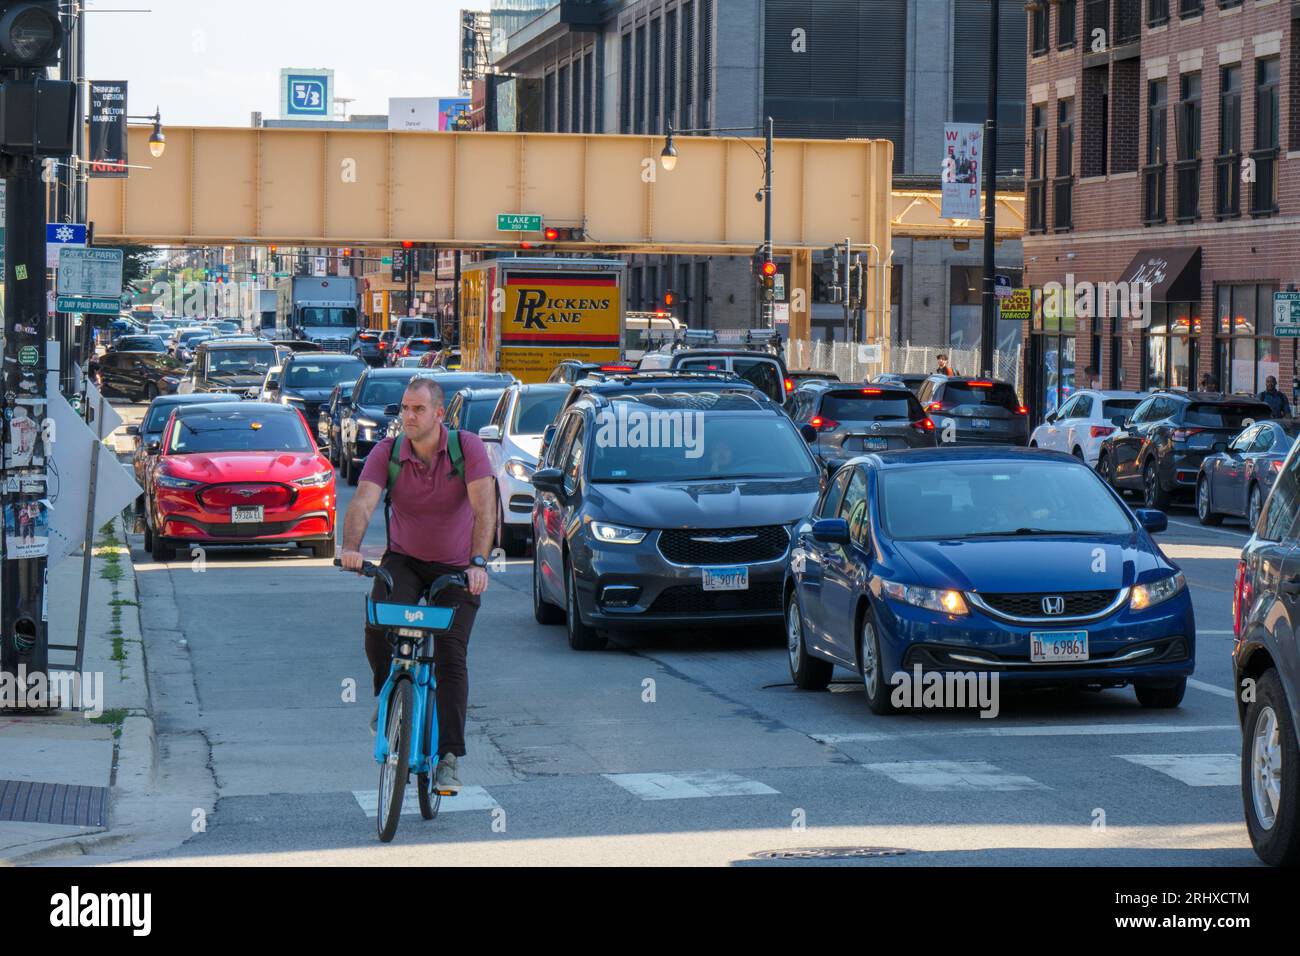 Bicyclist on rental bike in rush hour traffic on Halsted Street, Chicago, Illinois. Stock Photo